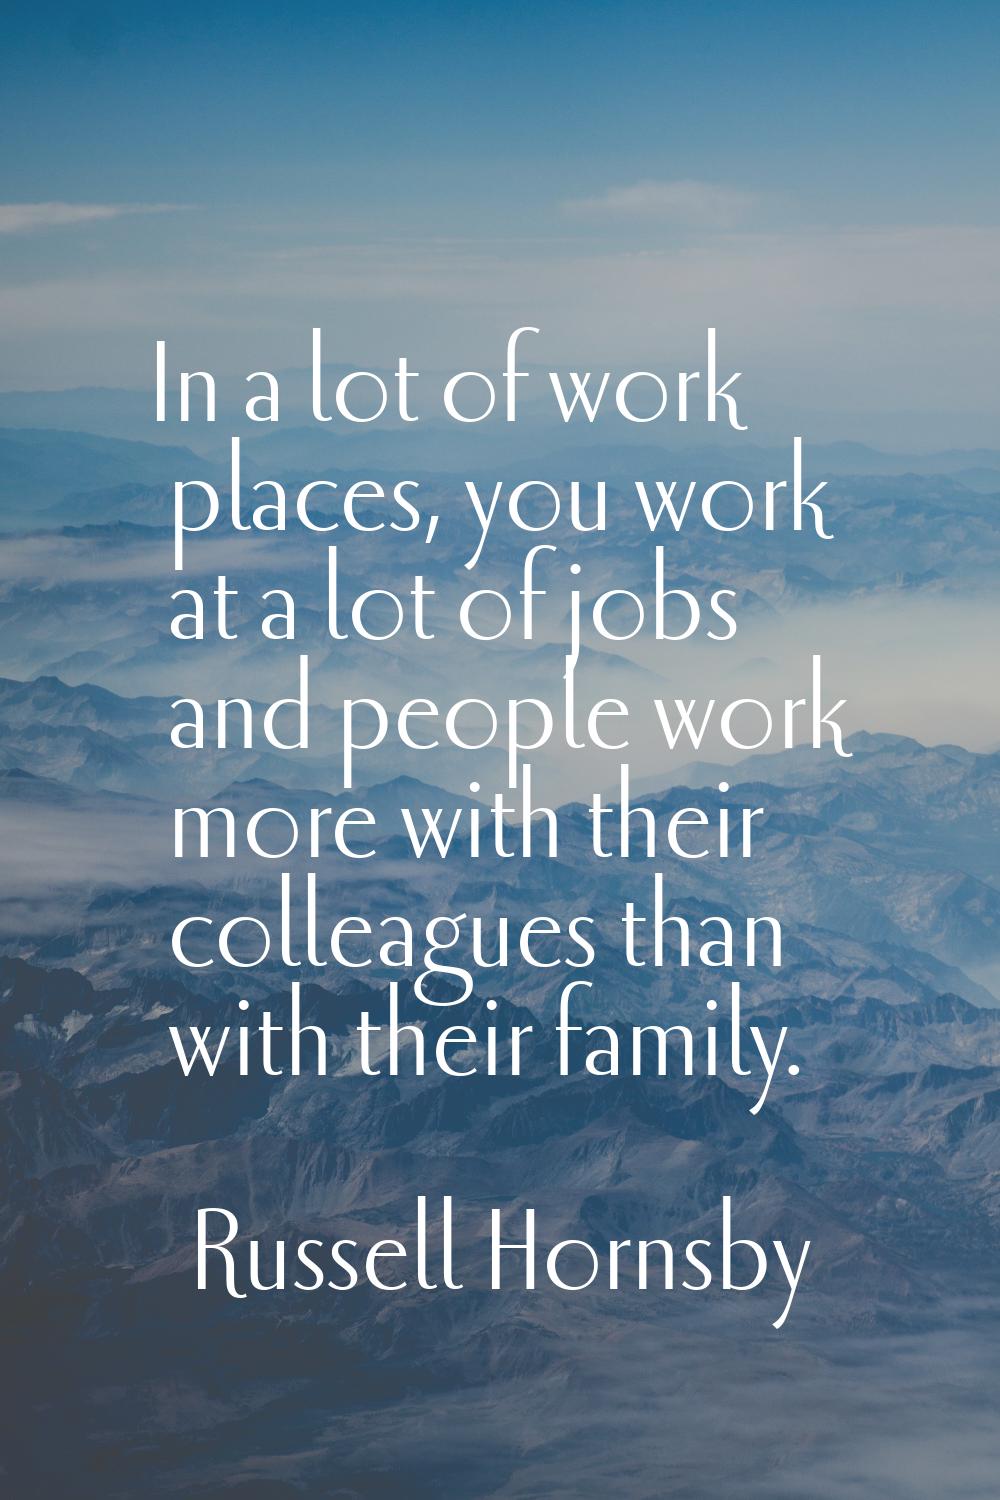 In a lot of work places, you work at a lot of jobs and people work more with their colleagues than 